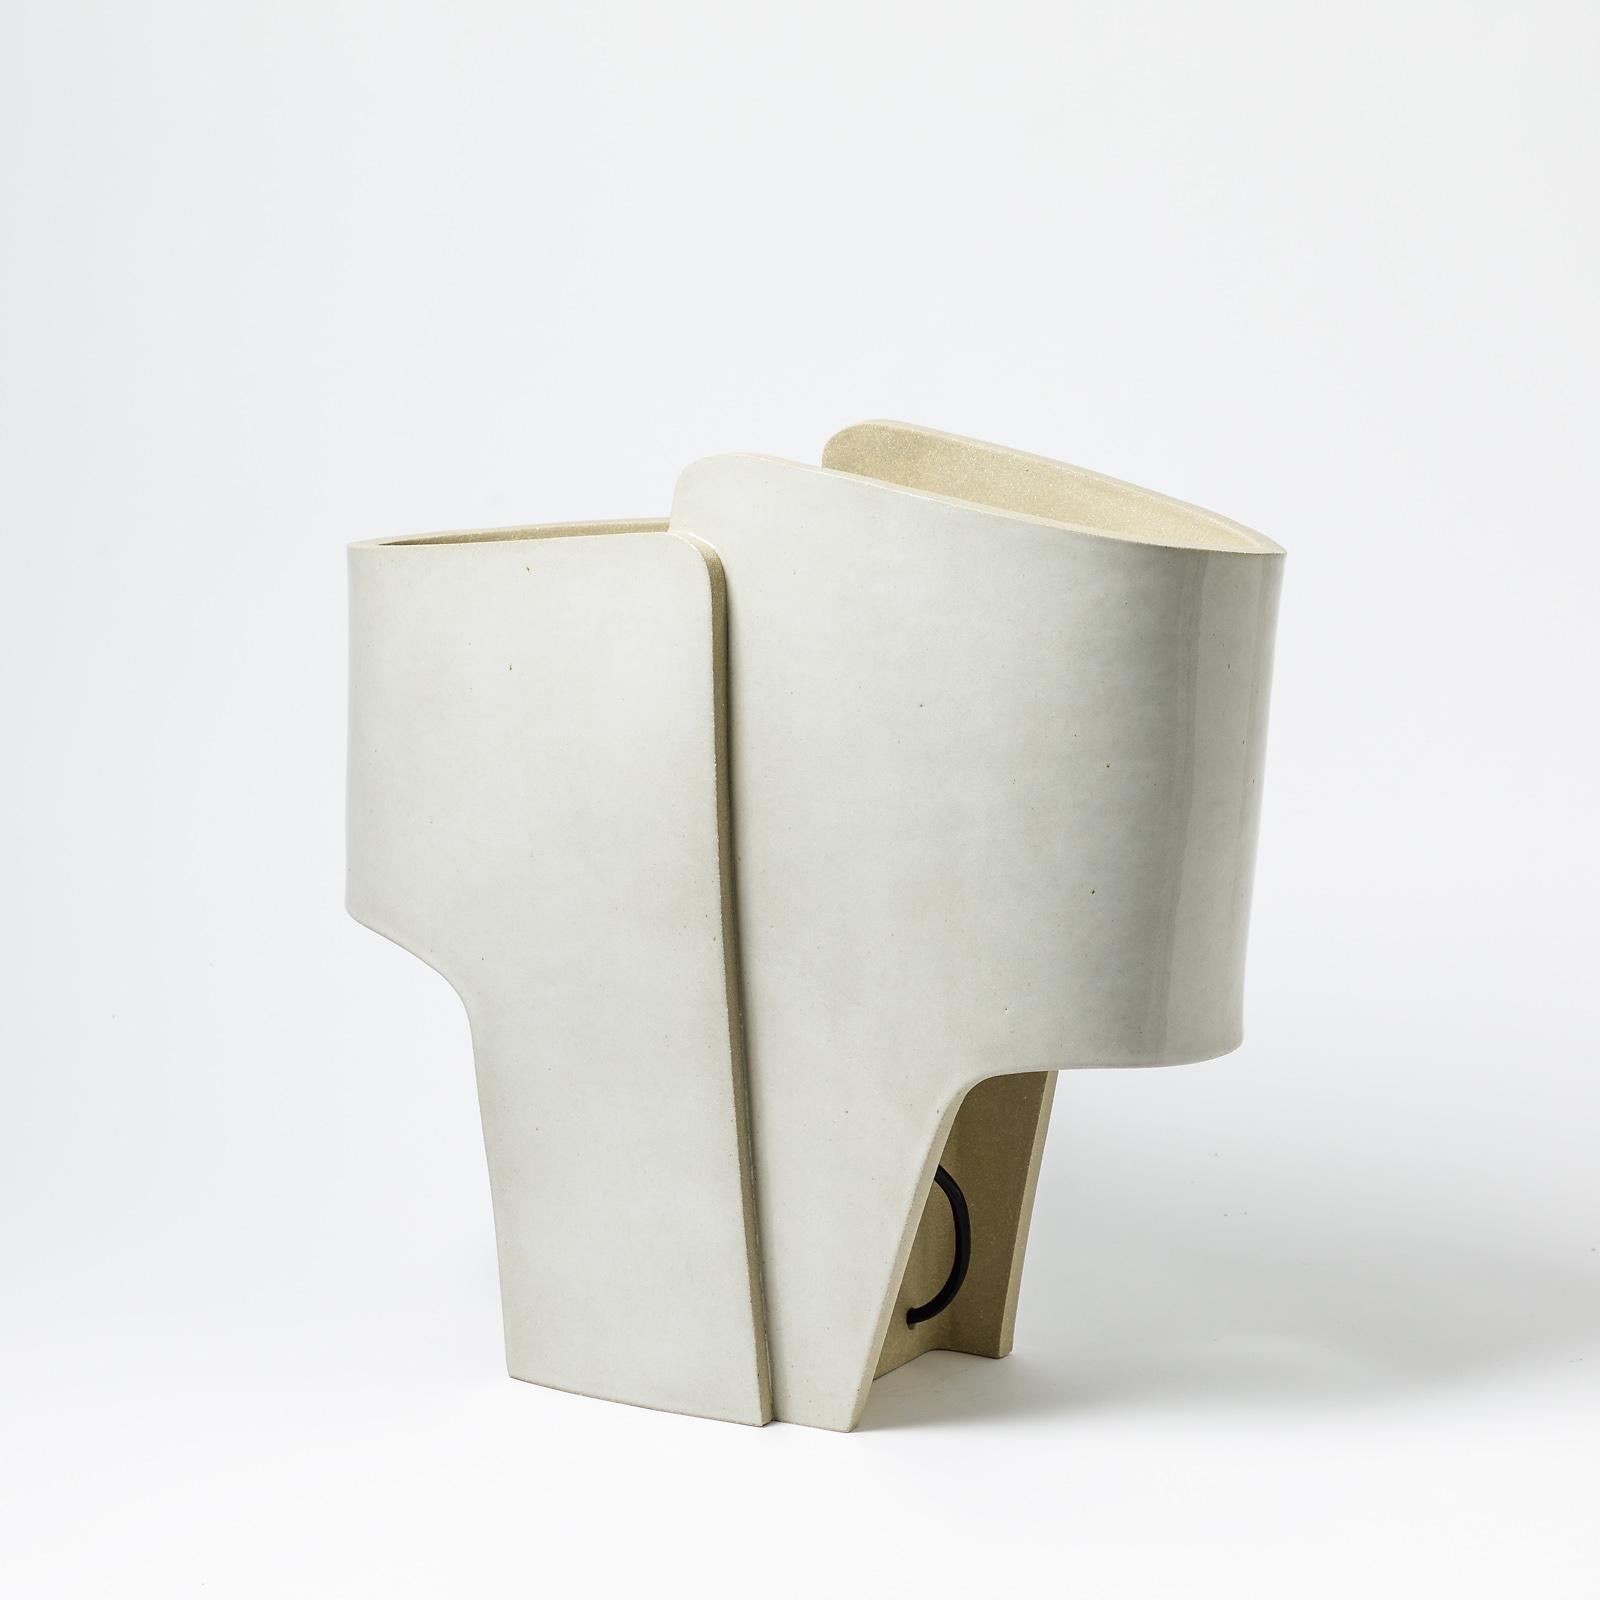 French Ceramic Table with White Lamp by Denis Castaing, 2022